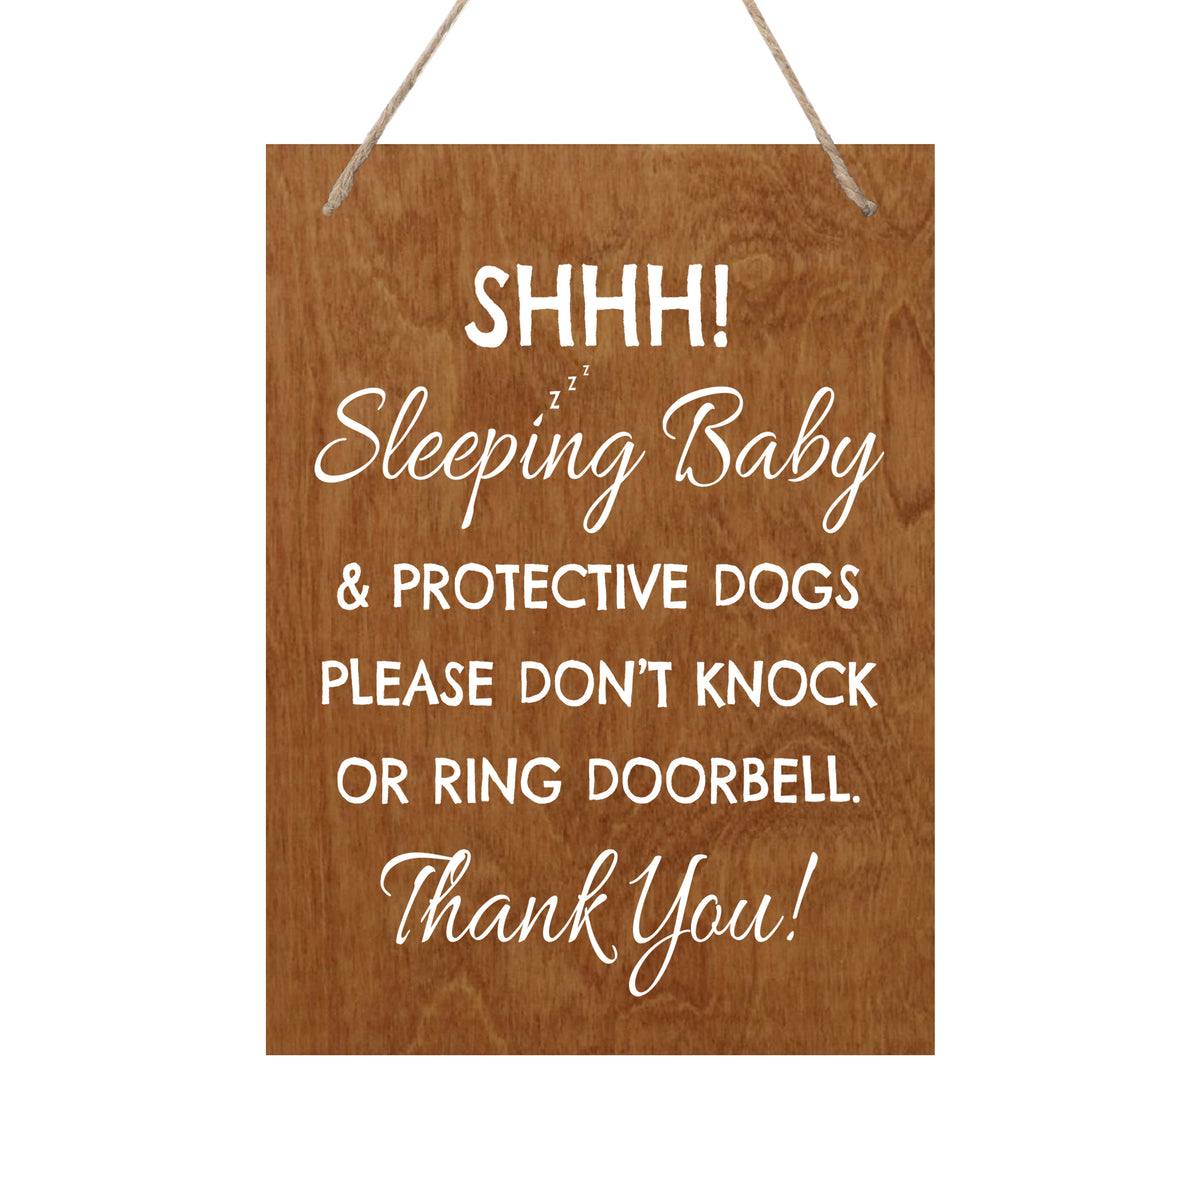 LifeSong Milestones Sleeping Baby Protective Puppies Baltic Birch Rope Hanging Sign for Front Door - Do Not Knock or Ring Doorbell - Quiet Entry for House New Home Decor - 8x9.75